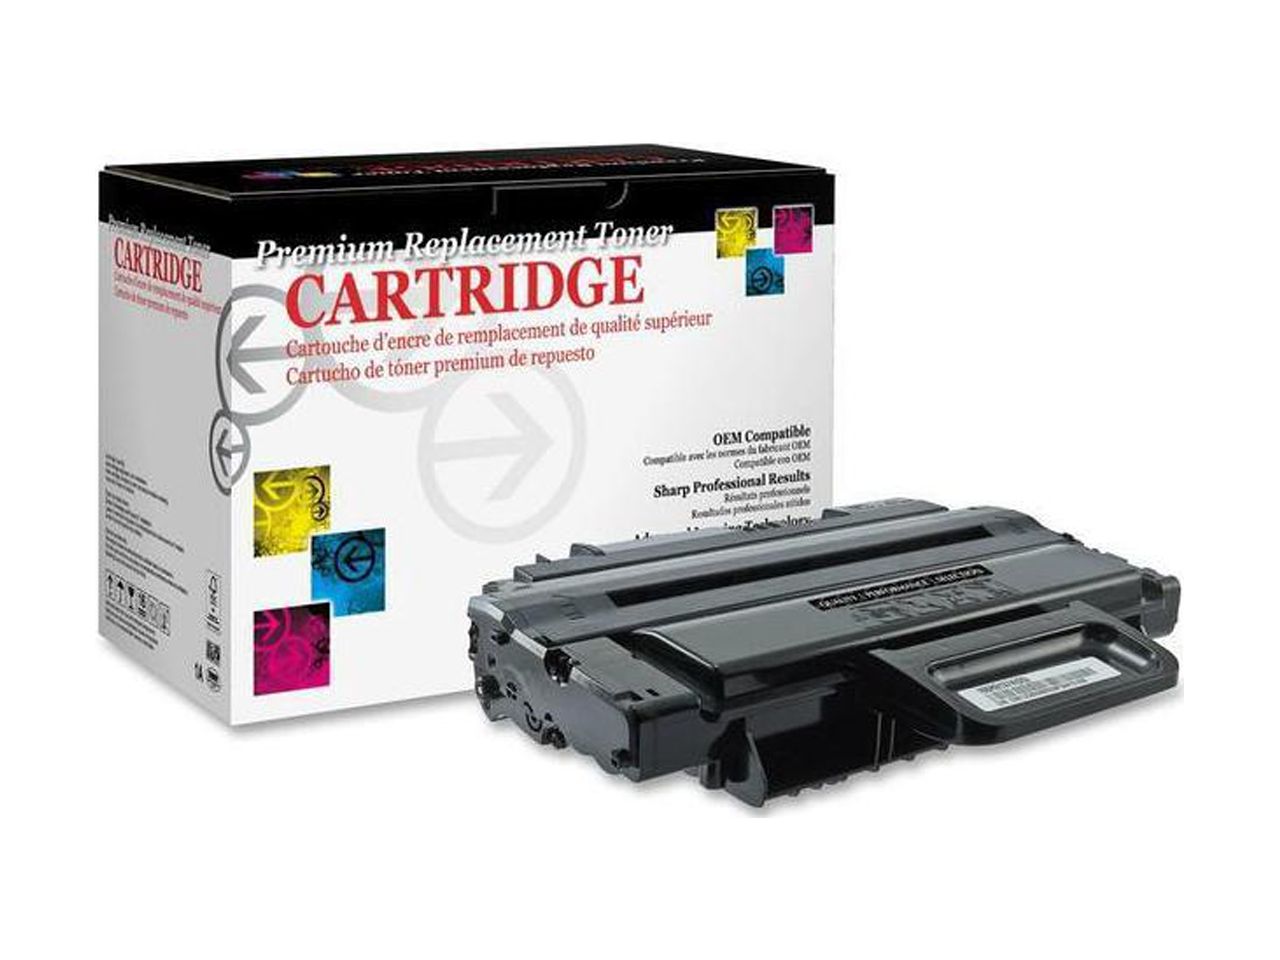 Remanufactured WEST POINT PRODUCTS 116391P Toner Cartridge 5 000 Page Yield Black - image 3 of 3